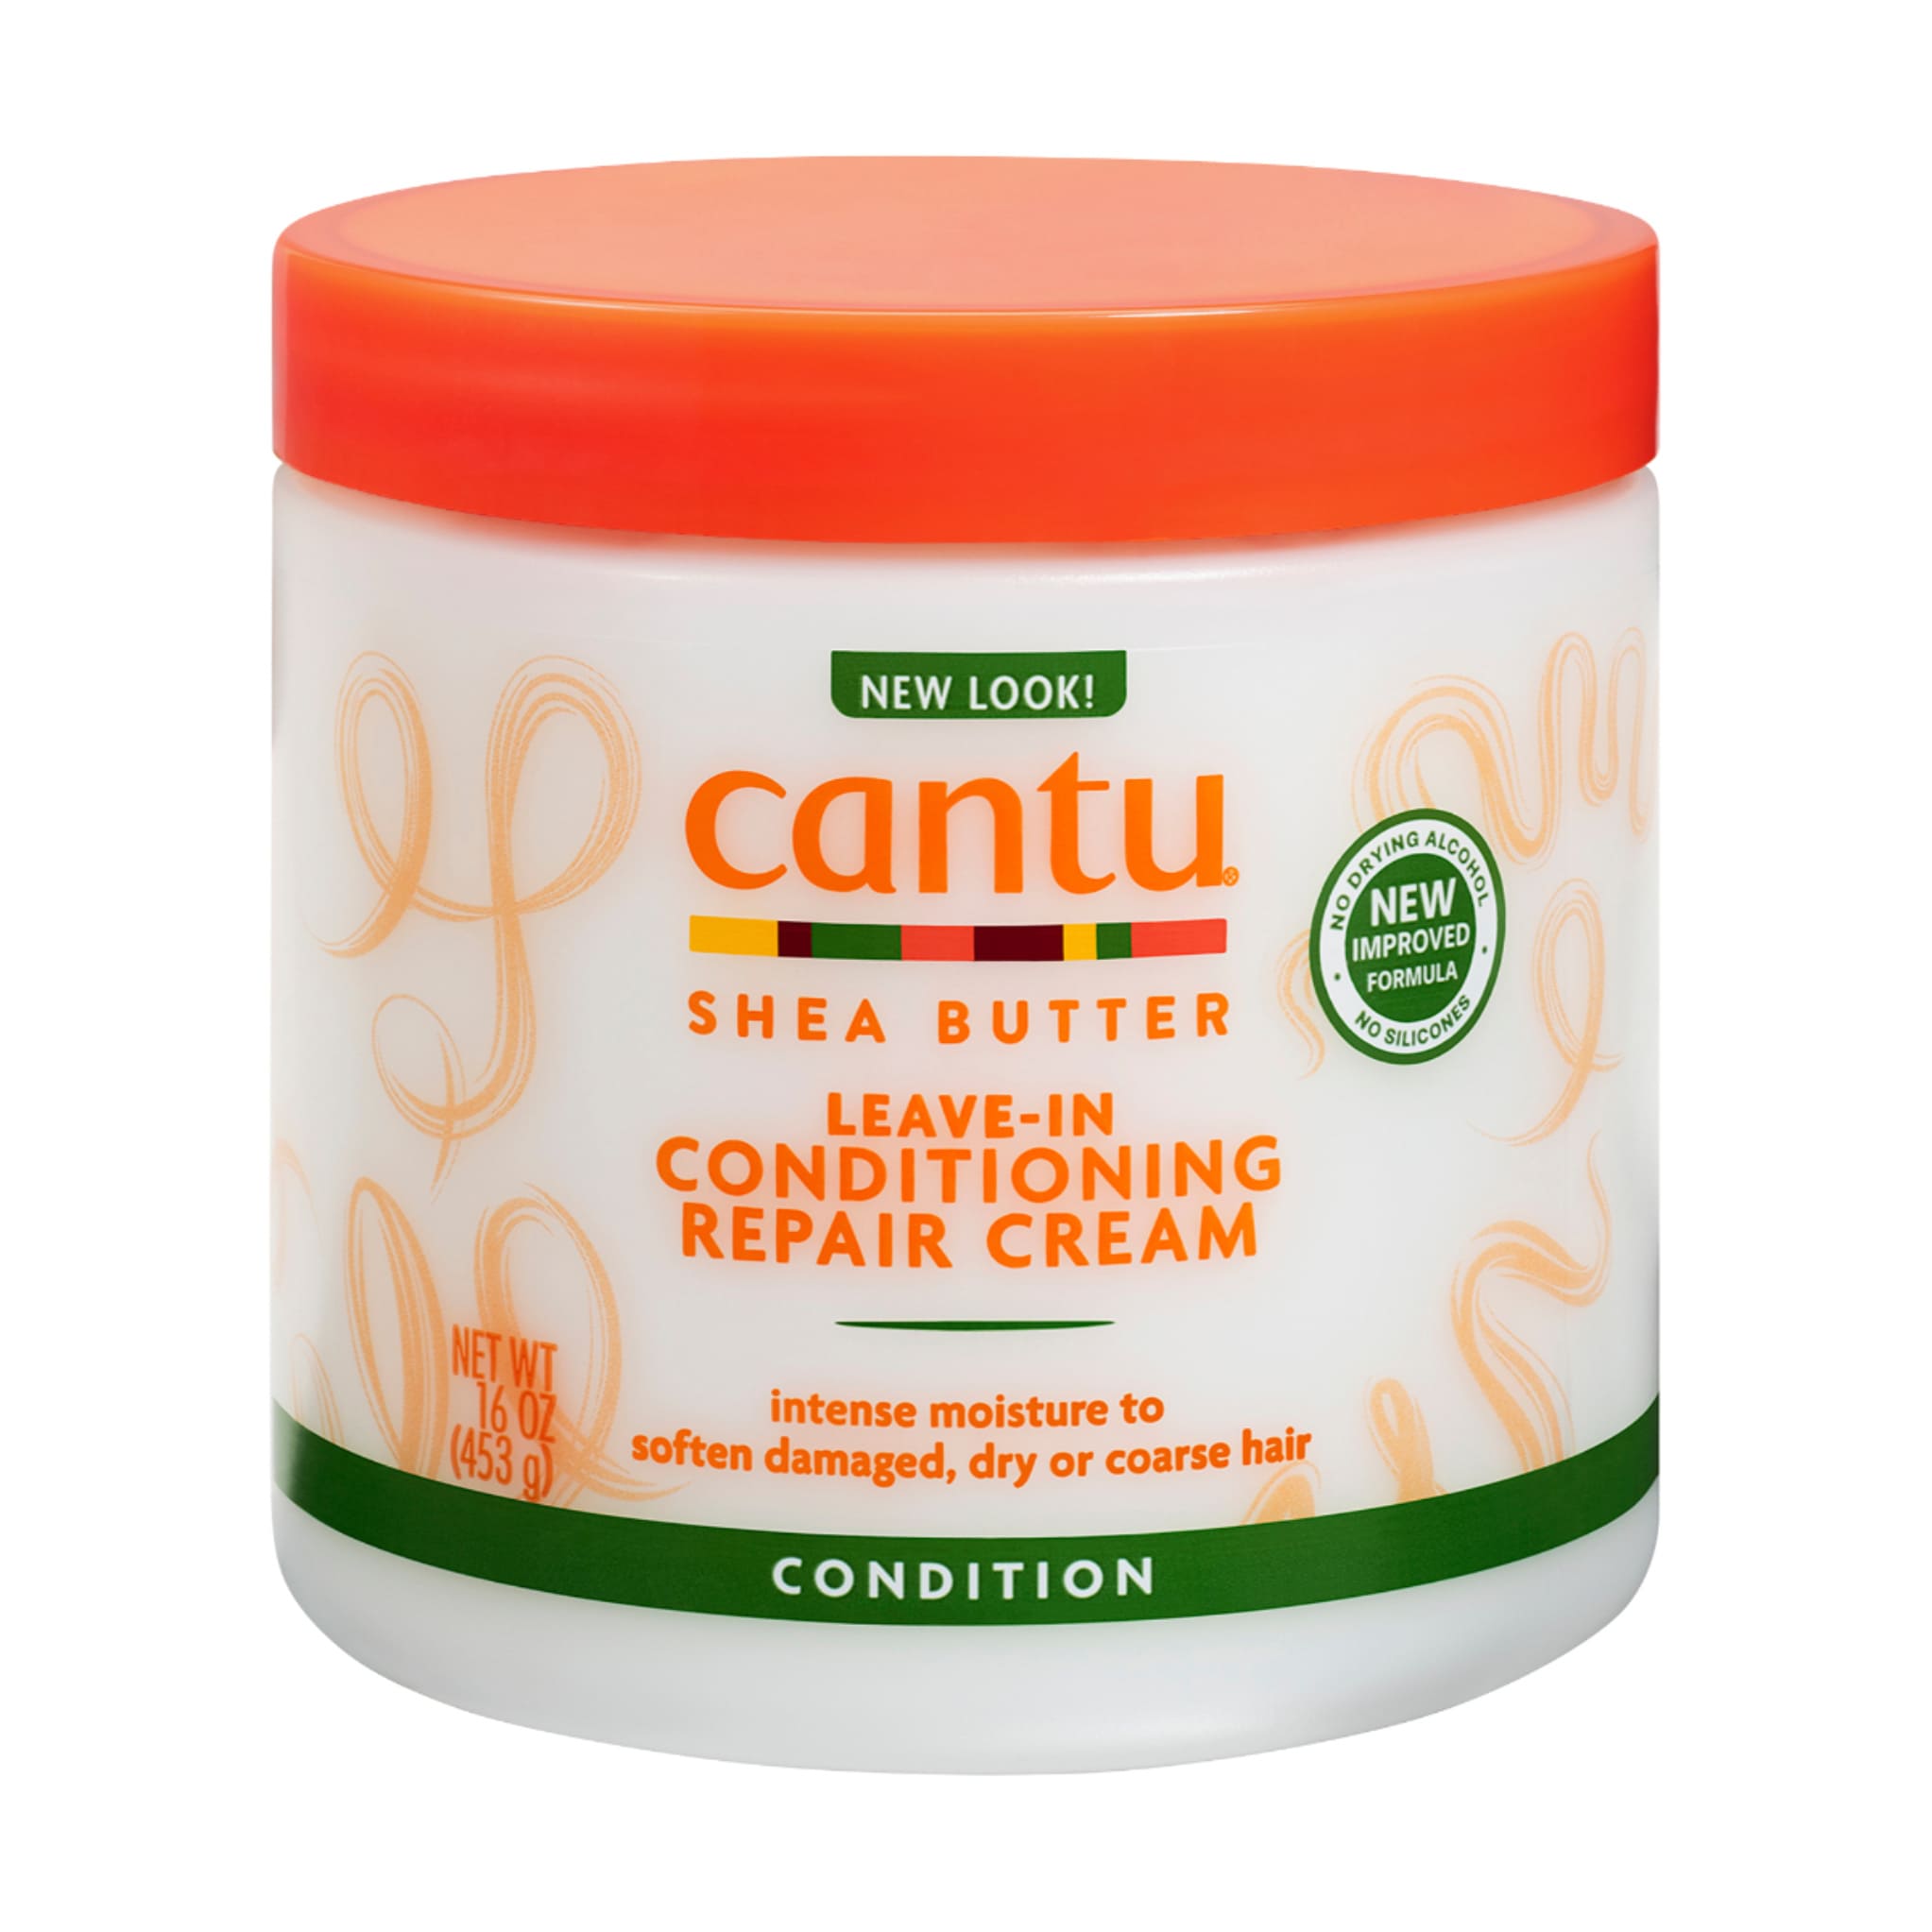 Cantu, Leave-in Conditioning Repair Cream Shea Butter 453g - Cosmetic Connection